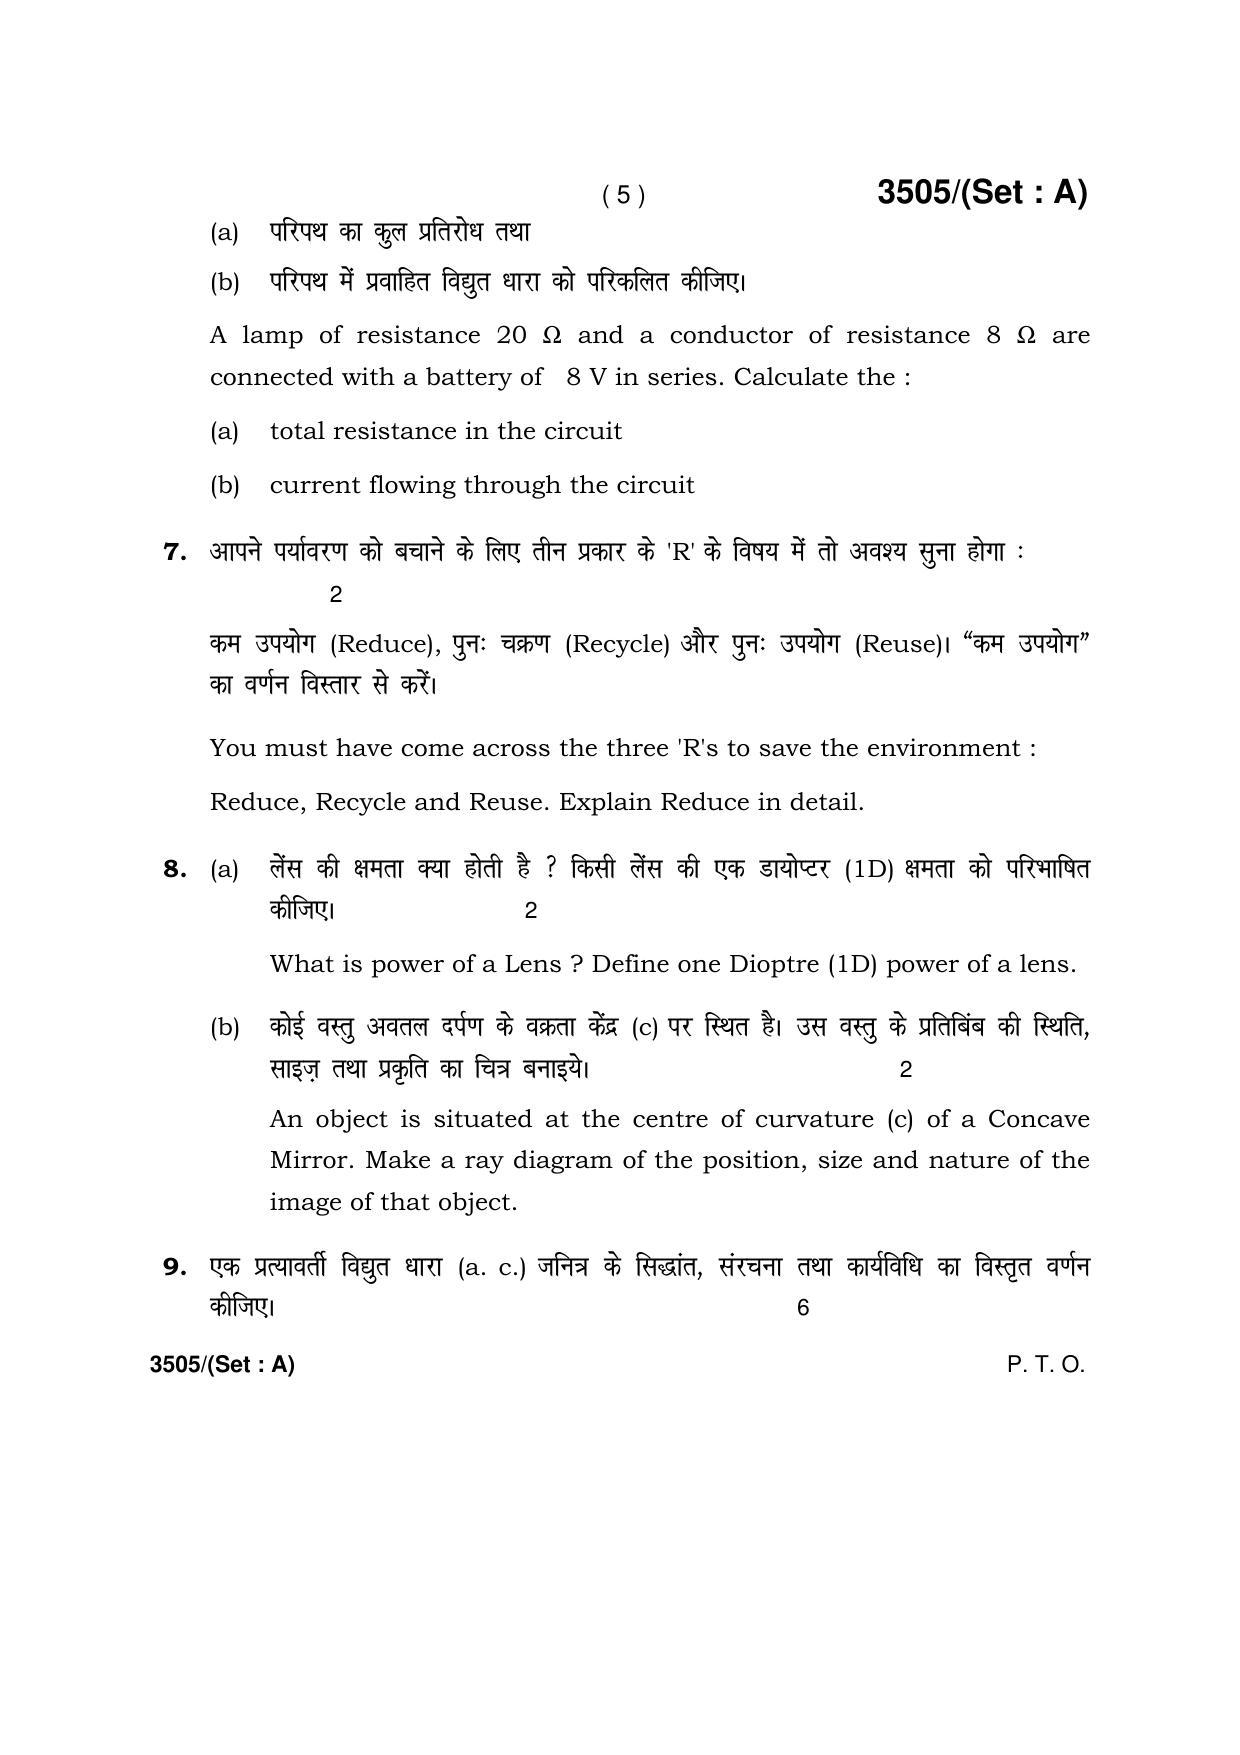 Haryana Board HBSE Class 10 Science -A 2018 Question Paper - Page 5